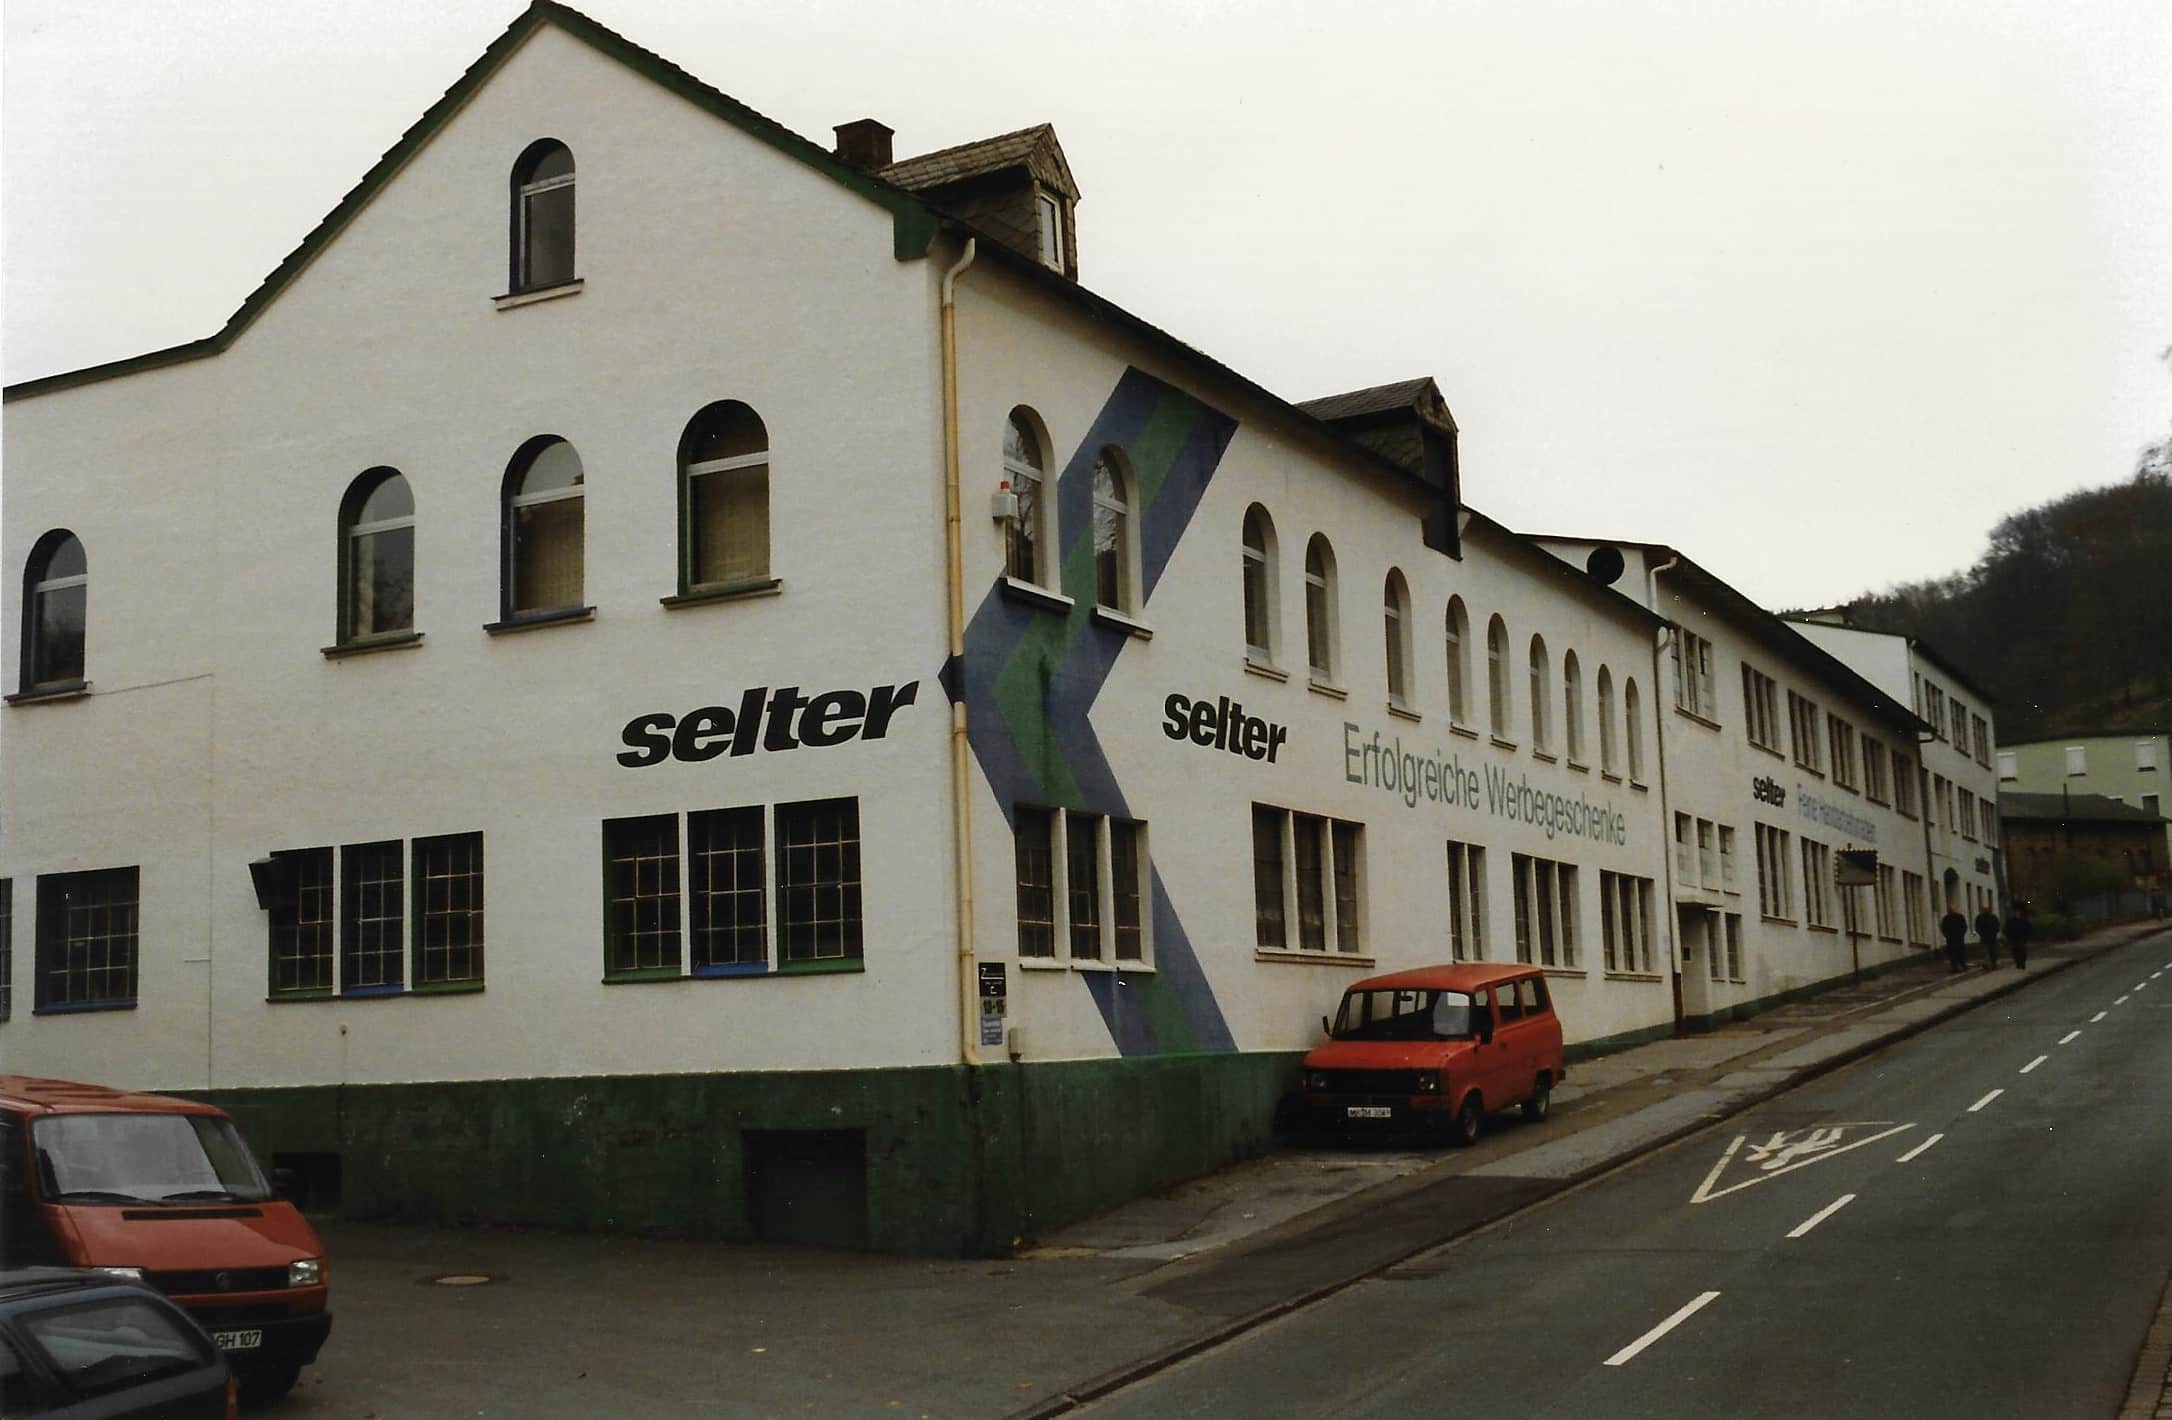 Company Selter in Dahle in former times